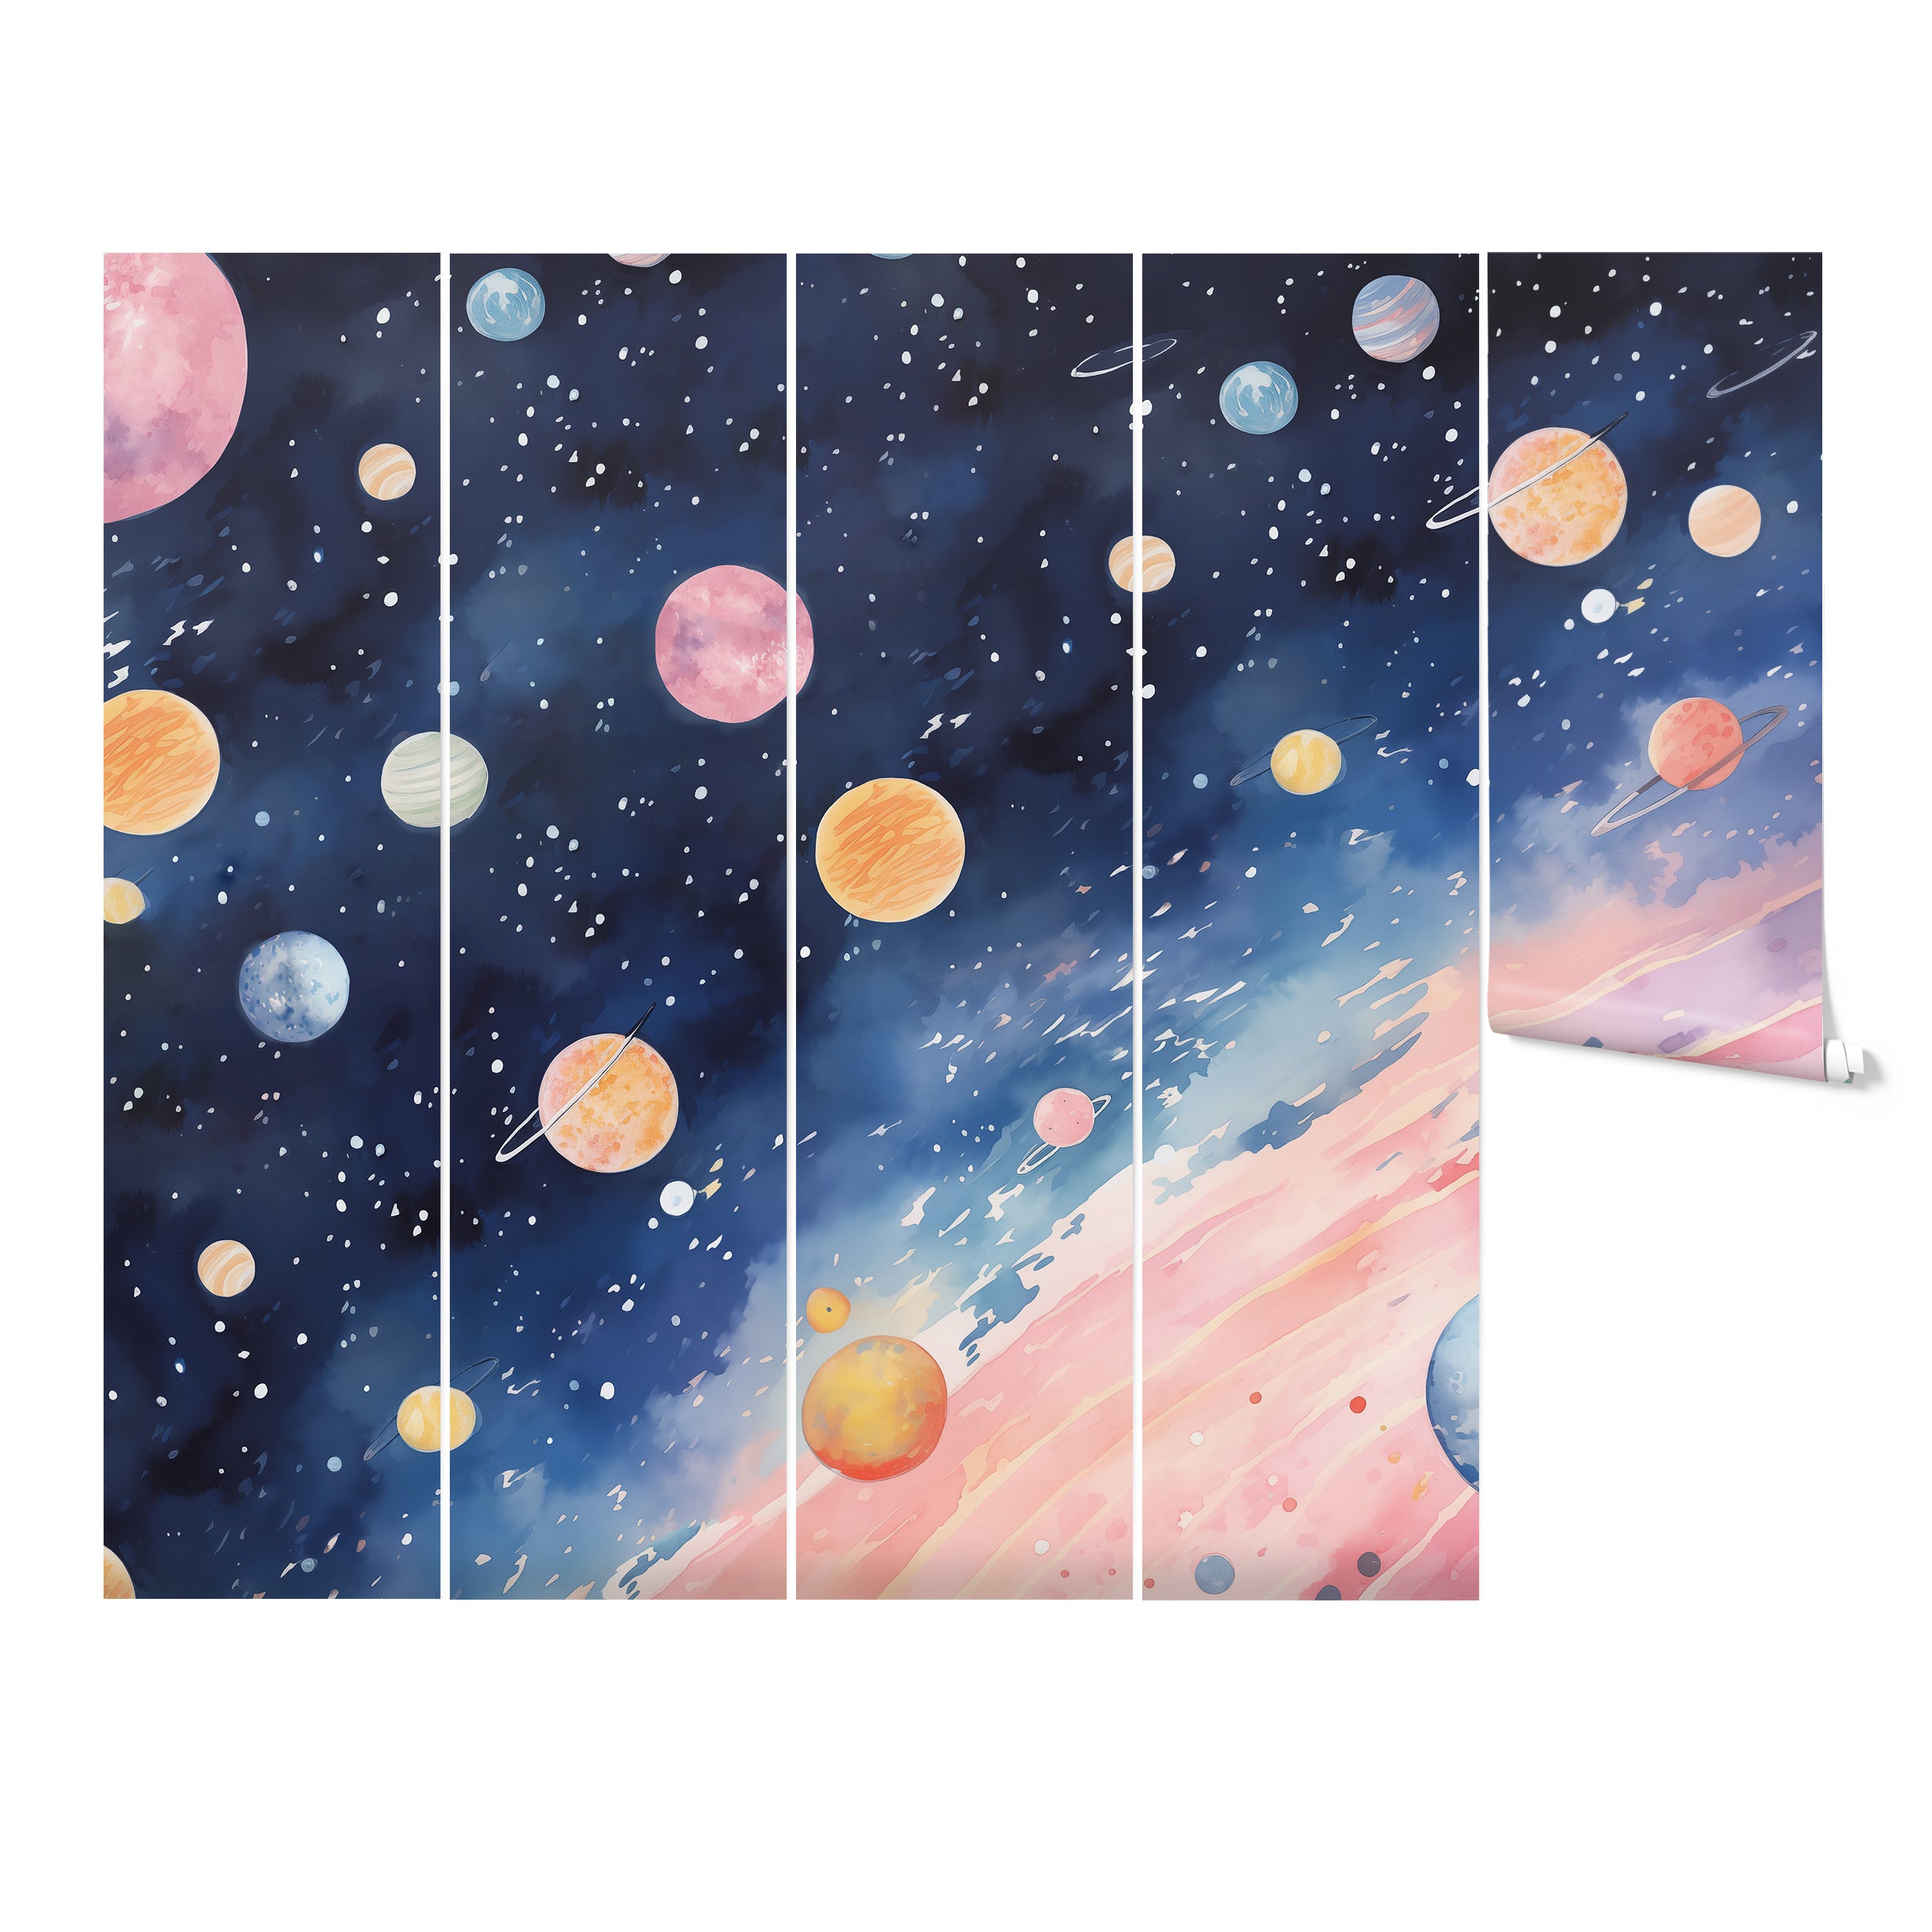 Outer Space Mural featuring a colorful array of planets and stars set against a deep, starry background.